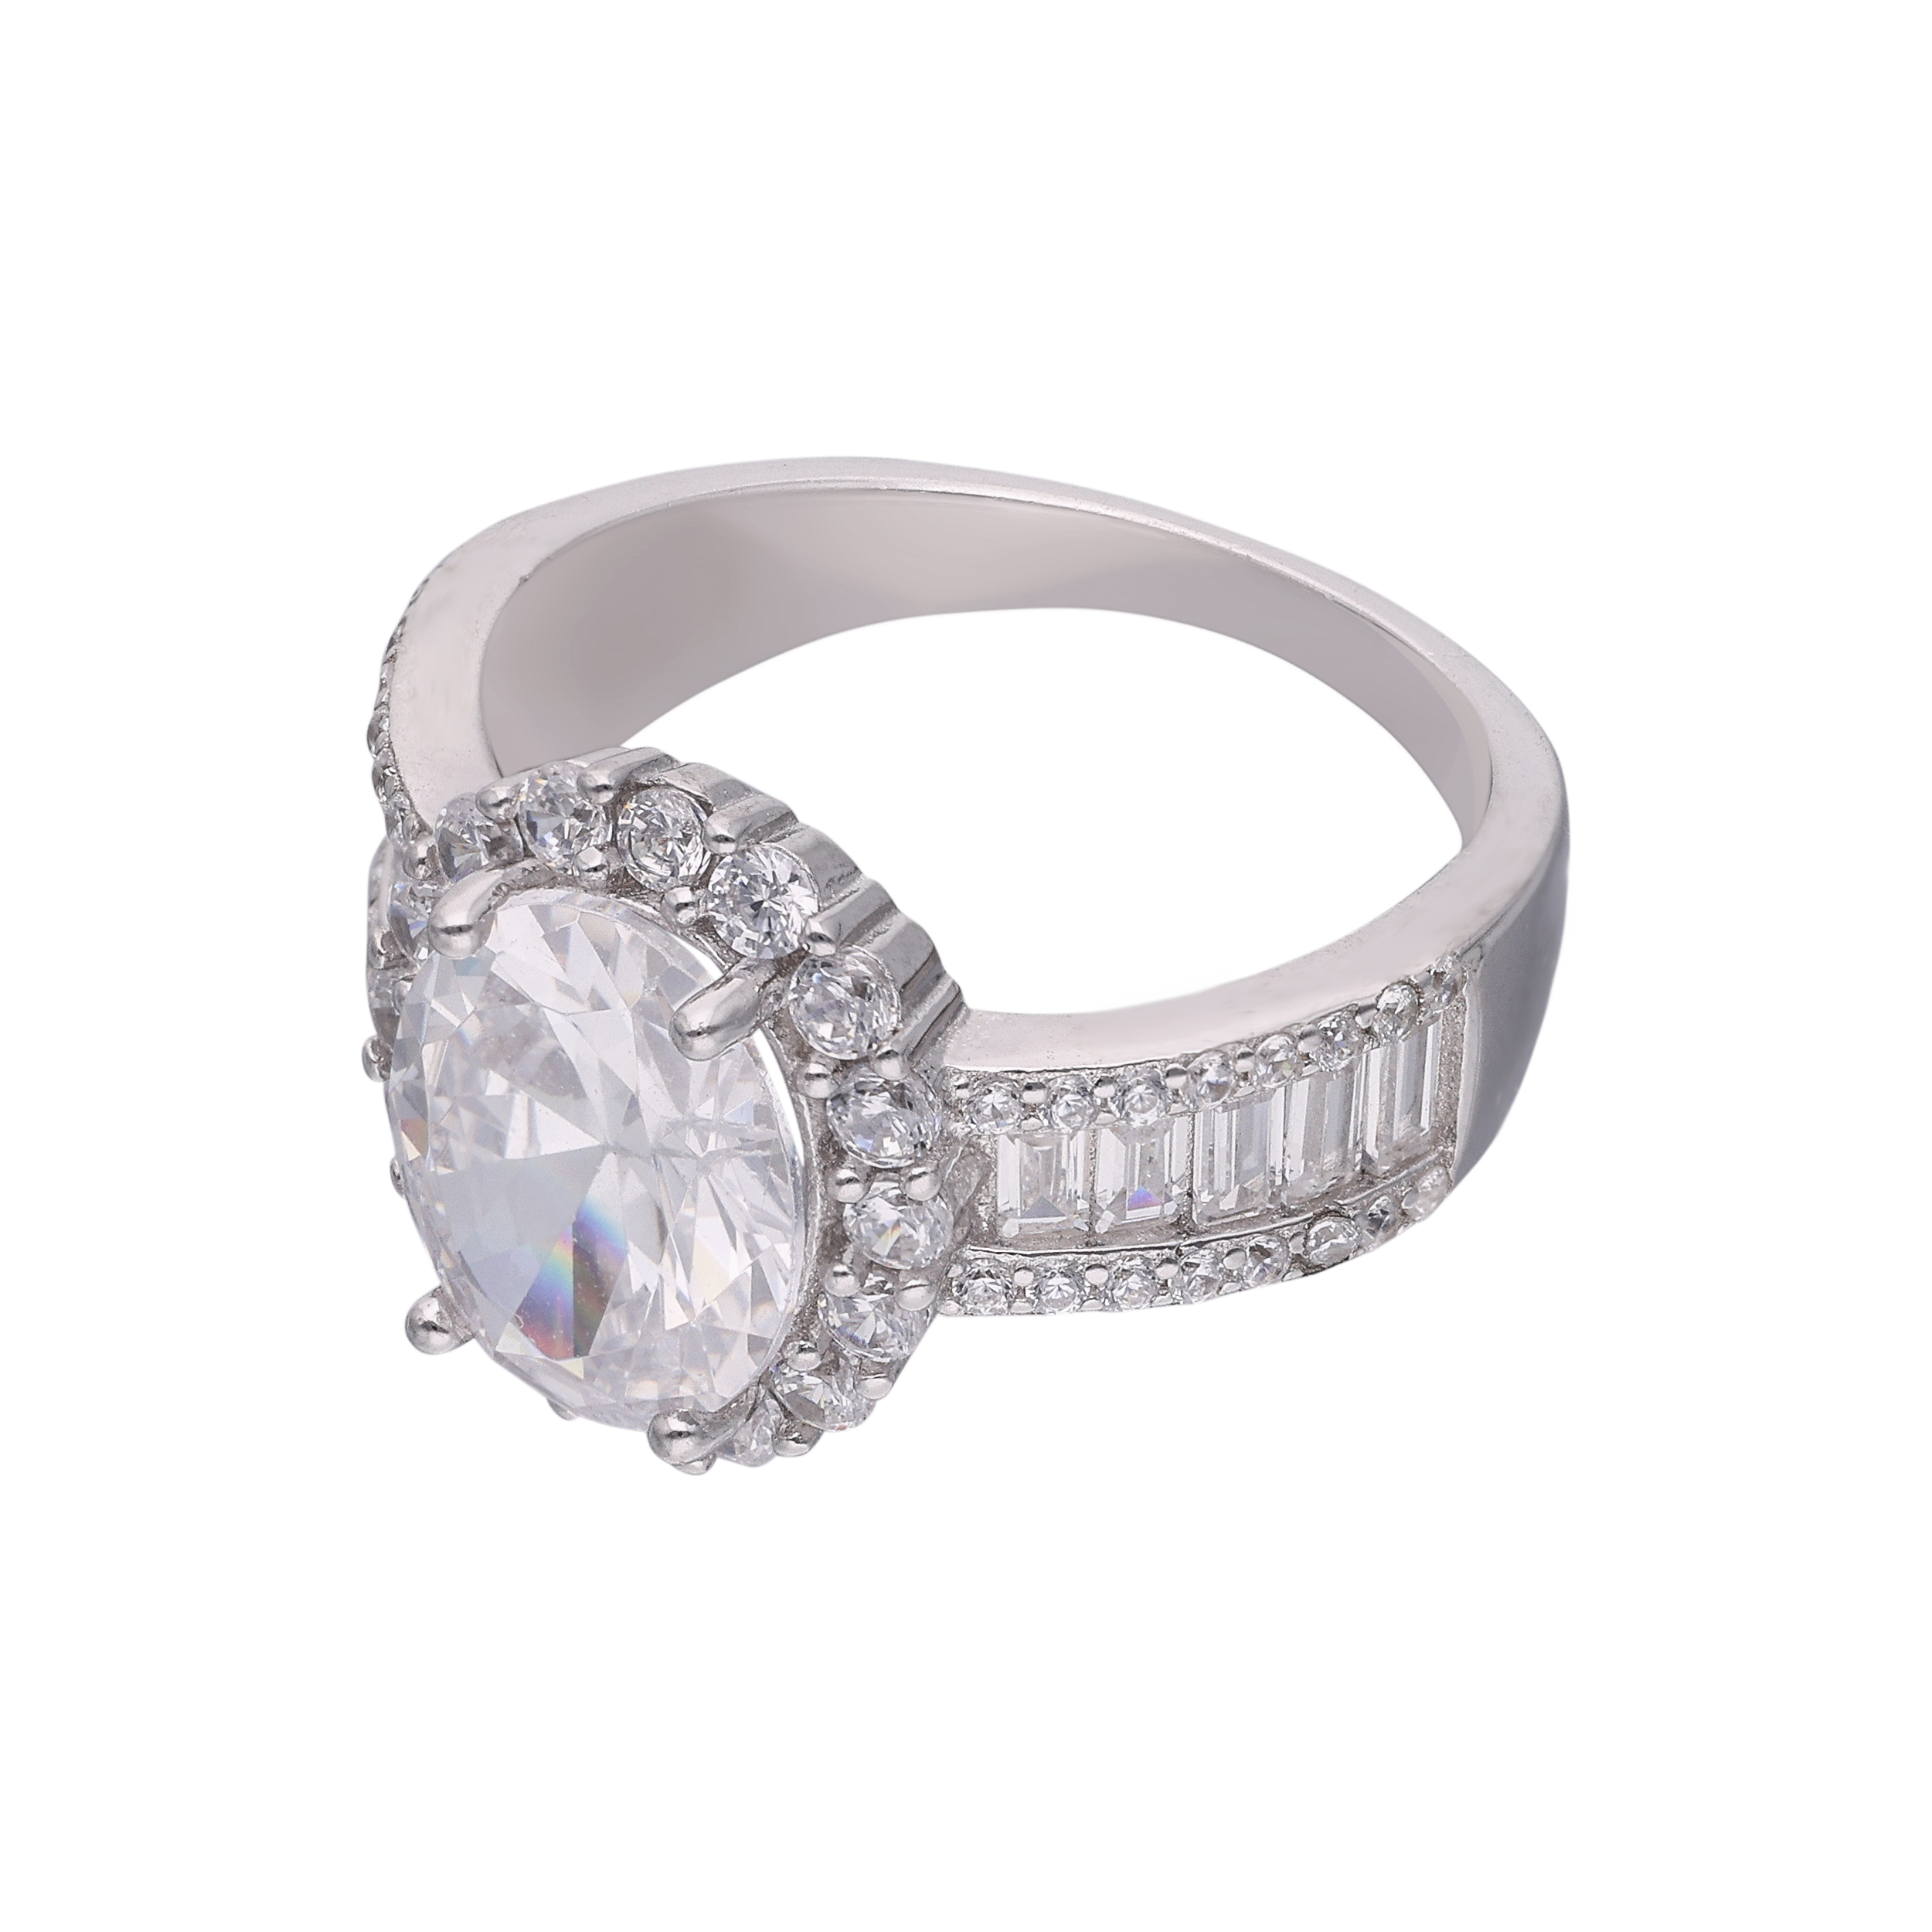 Sterling Silver Ring with  Floral Halo | SKU: 0002931456, 0002931142, 0002931357, 0002931227